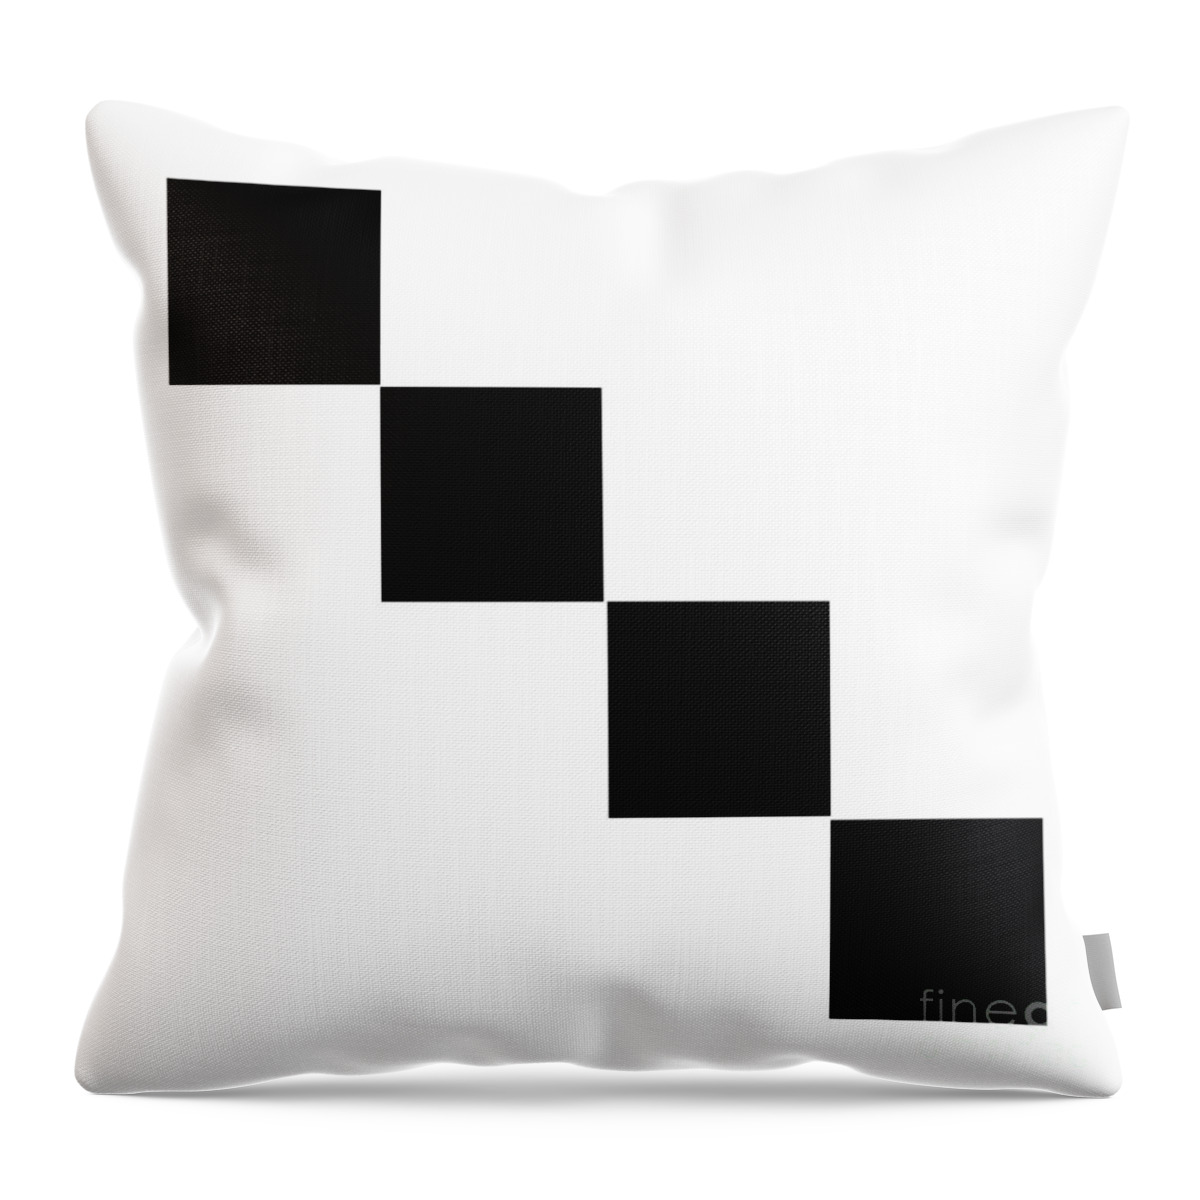 Andee Design Abstract Throw Pillow featuring the digital art Black And White 8 Square by Andee Design